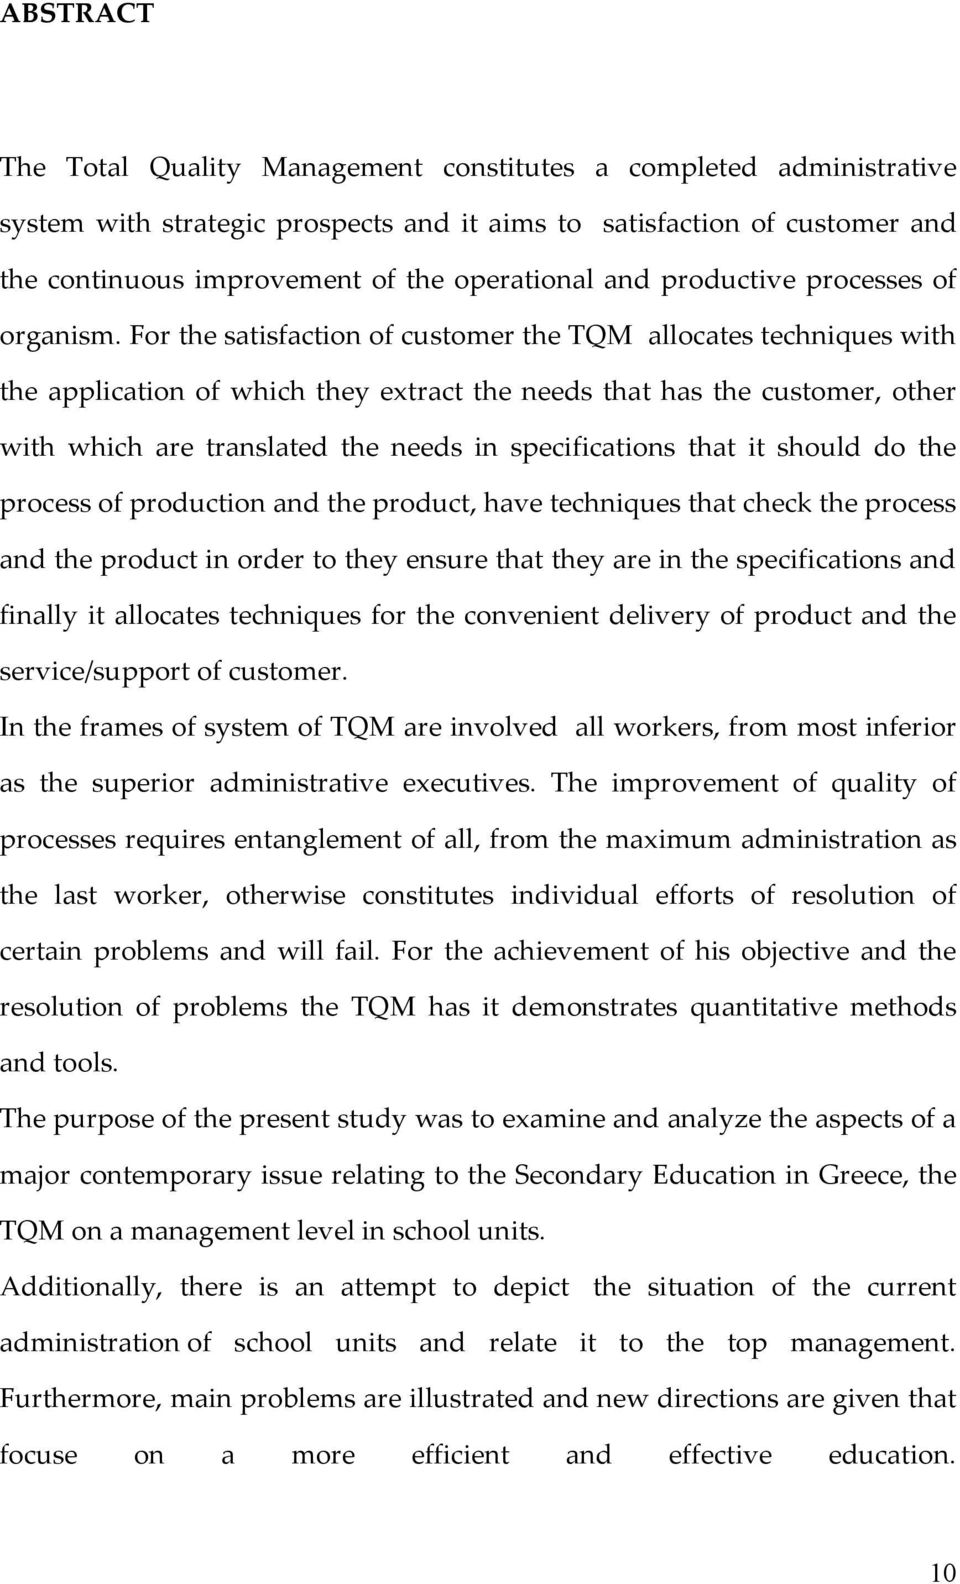 For the satisfaction of customer the TQM allocates techniques with the application of which they extract the needs that has the customer, other with which are translated the needs in specifications